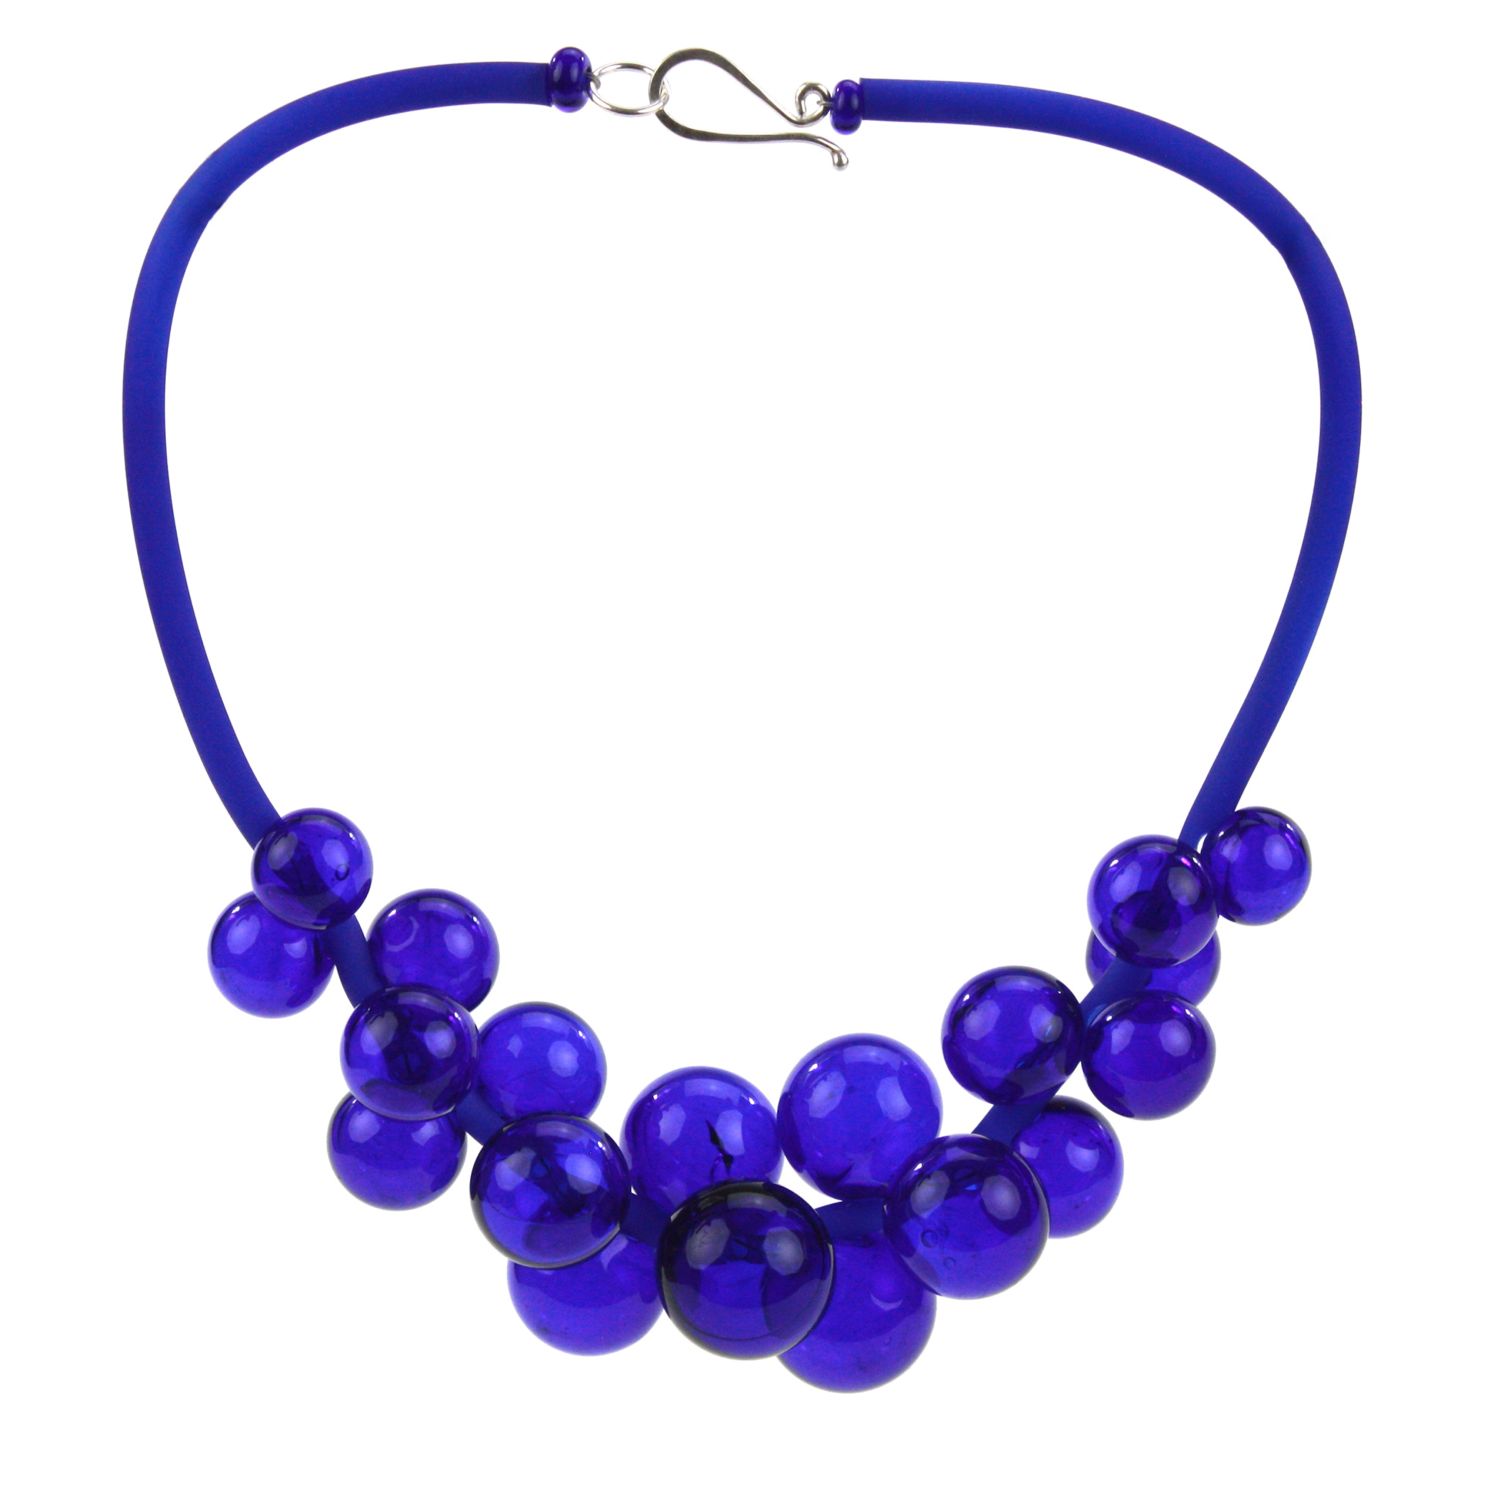 Alicia Niles: Chroma Bolla Necklace – Cobalt Product Image 1 of 3